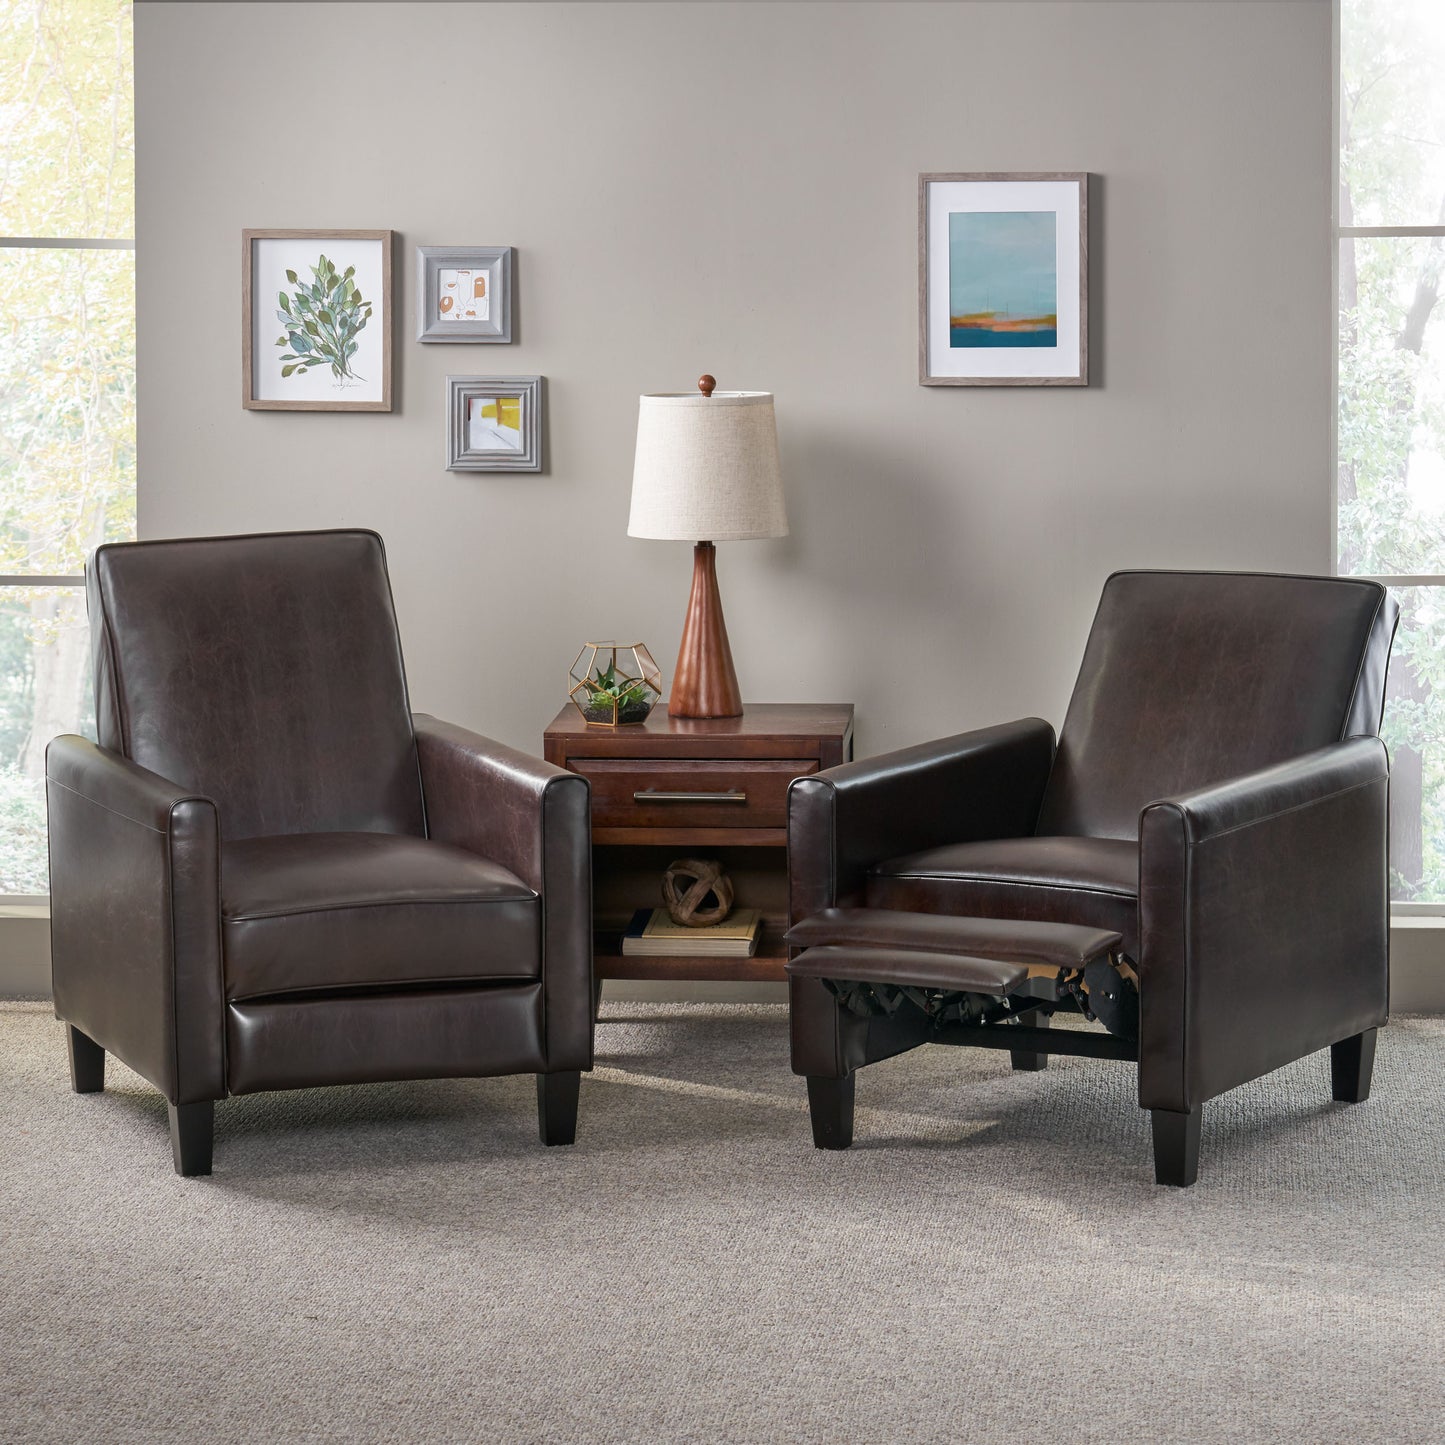 Olinda Contemporary Bonded Leather Recliner (Set of 2)